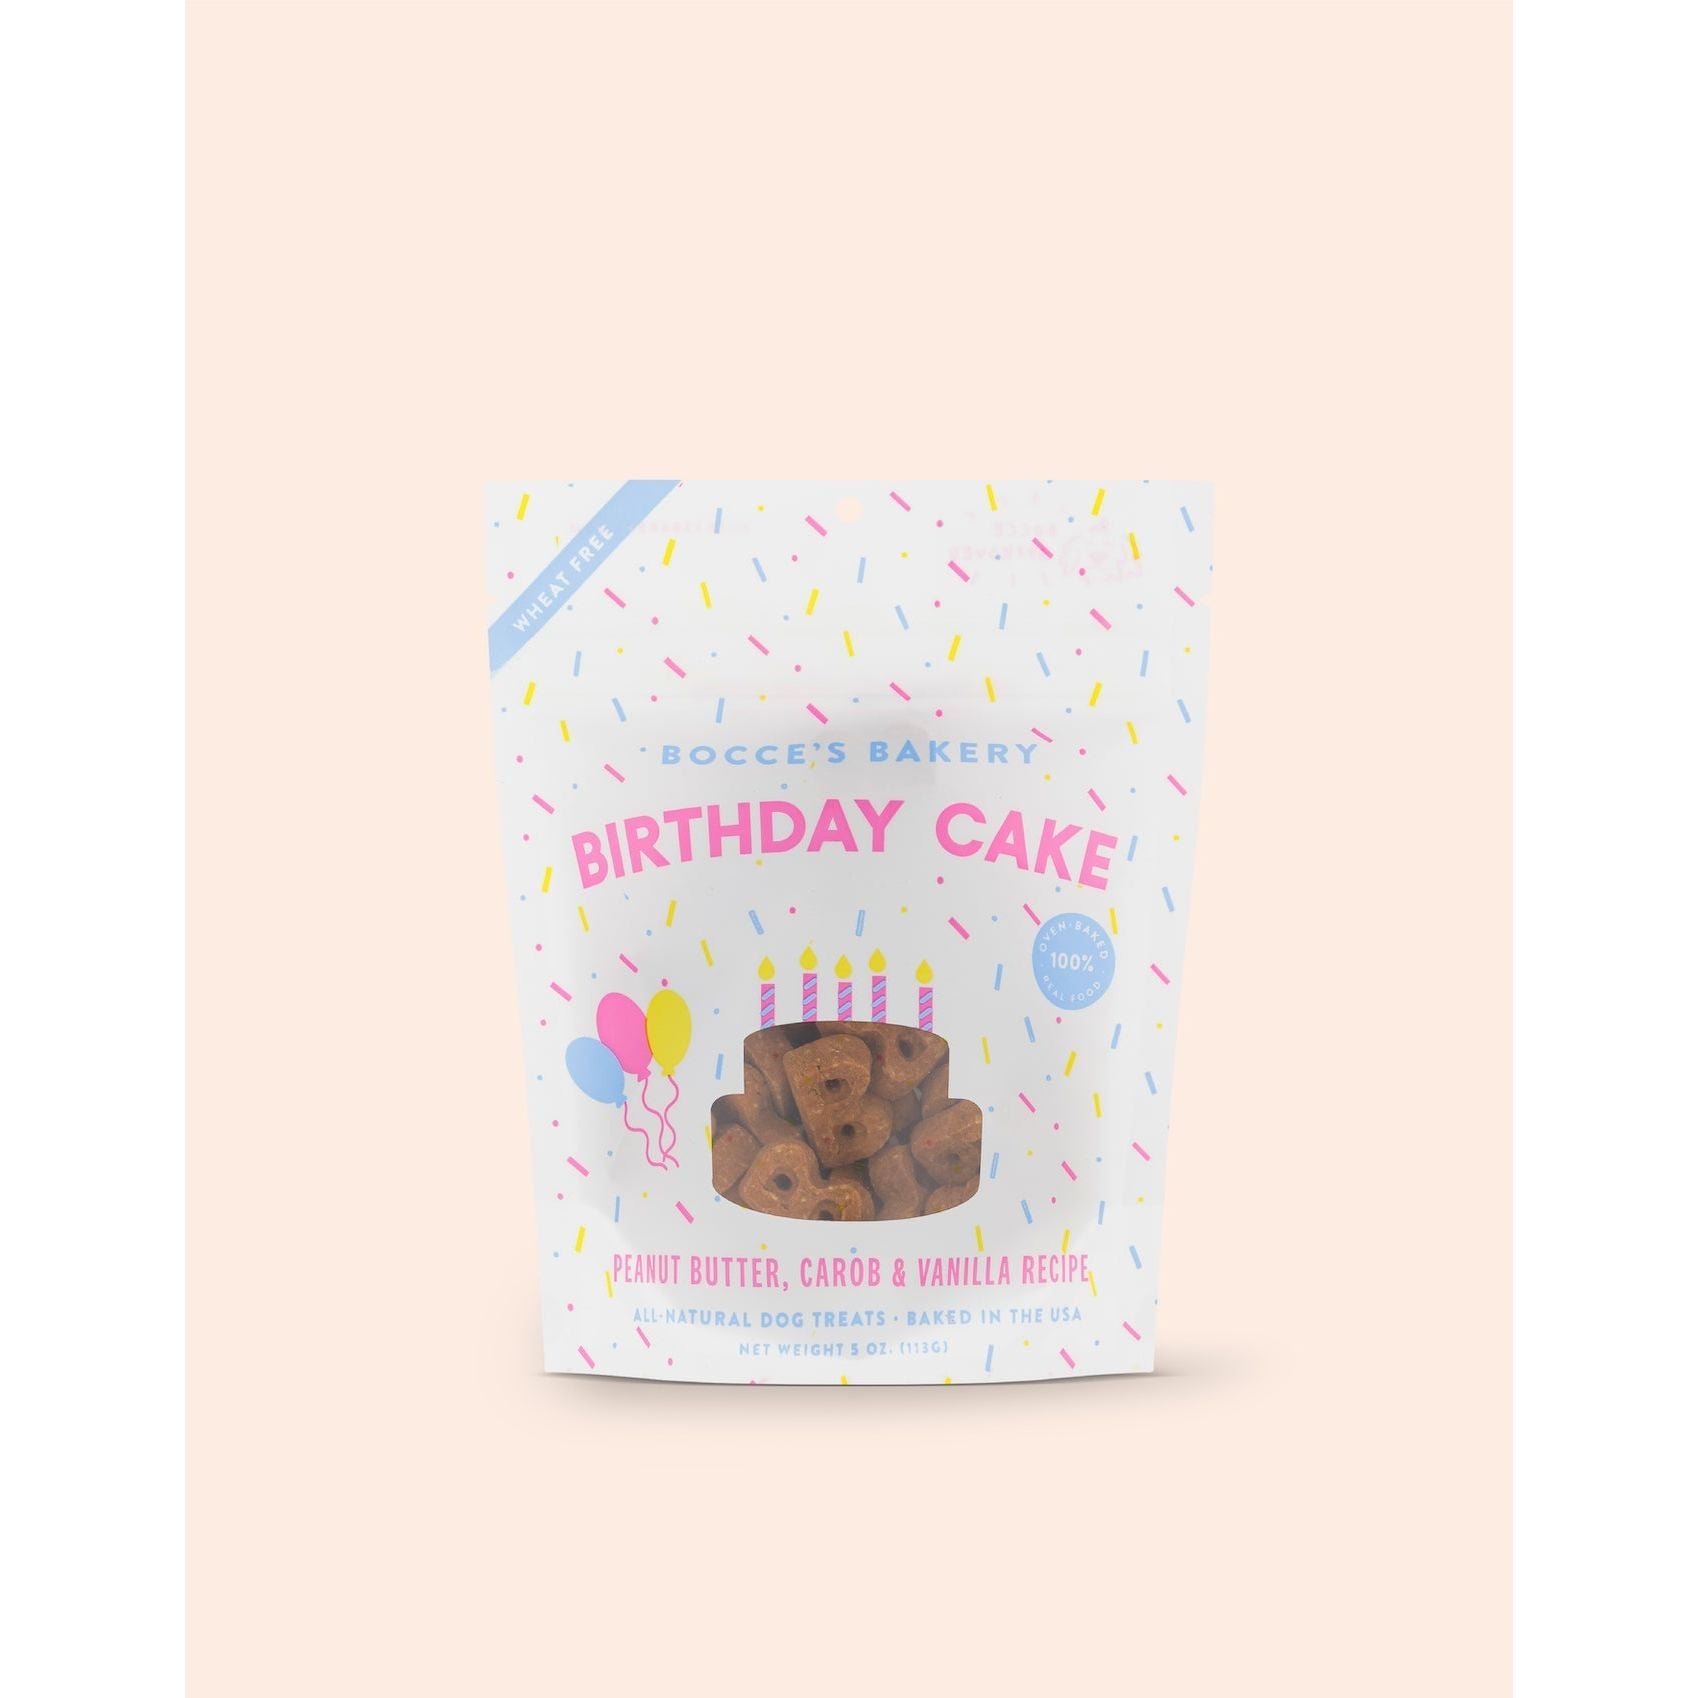 Bocce's Baker Dog Birthday Cake Biscuits 5oz